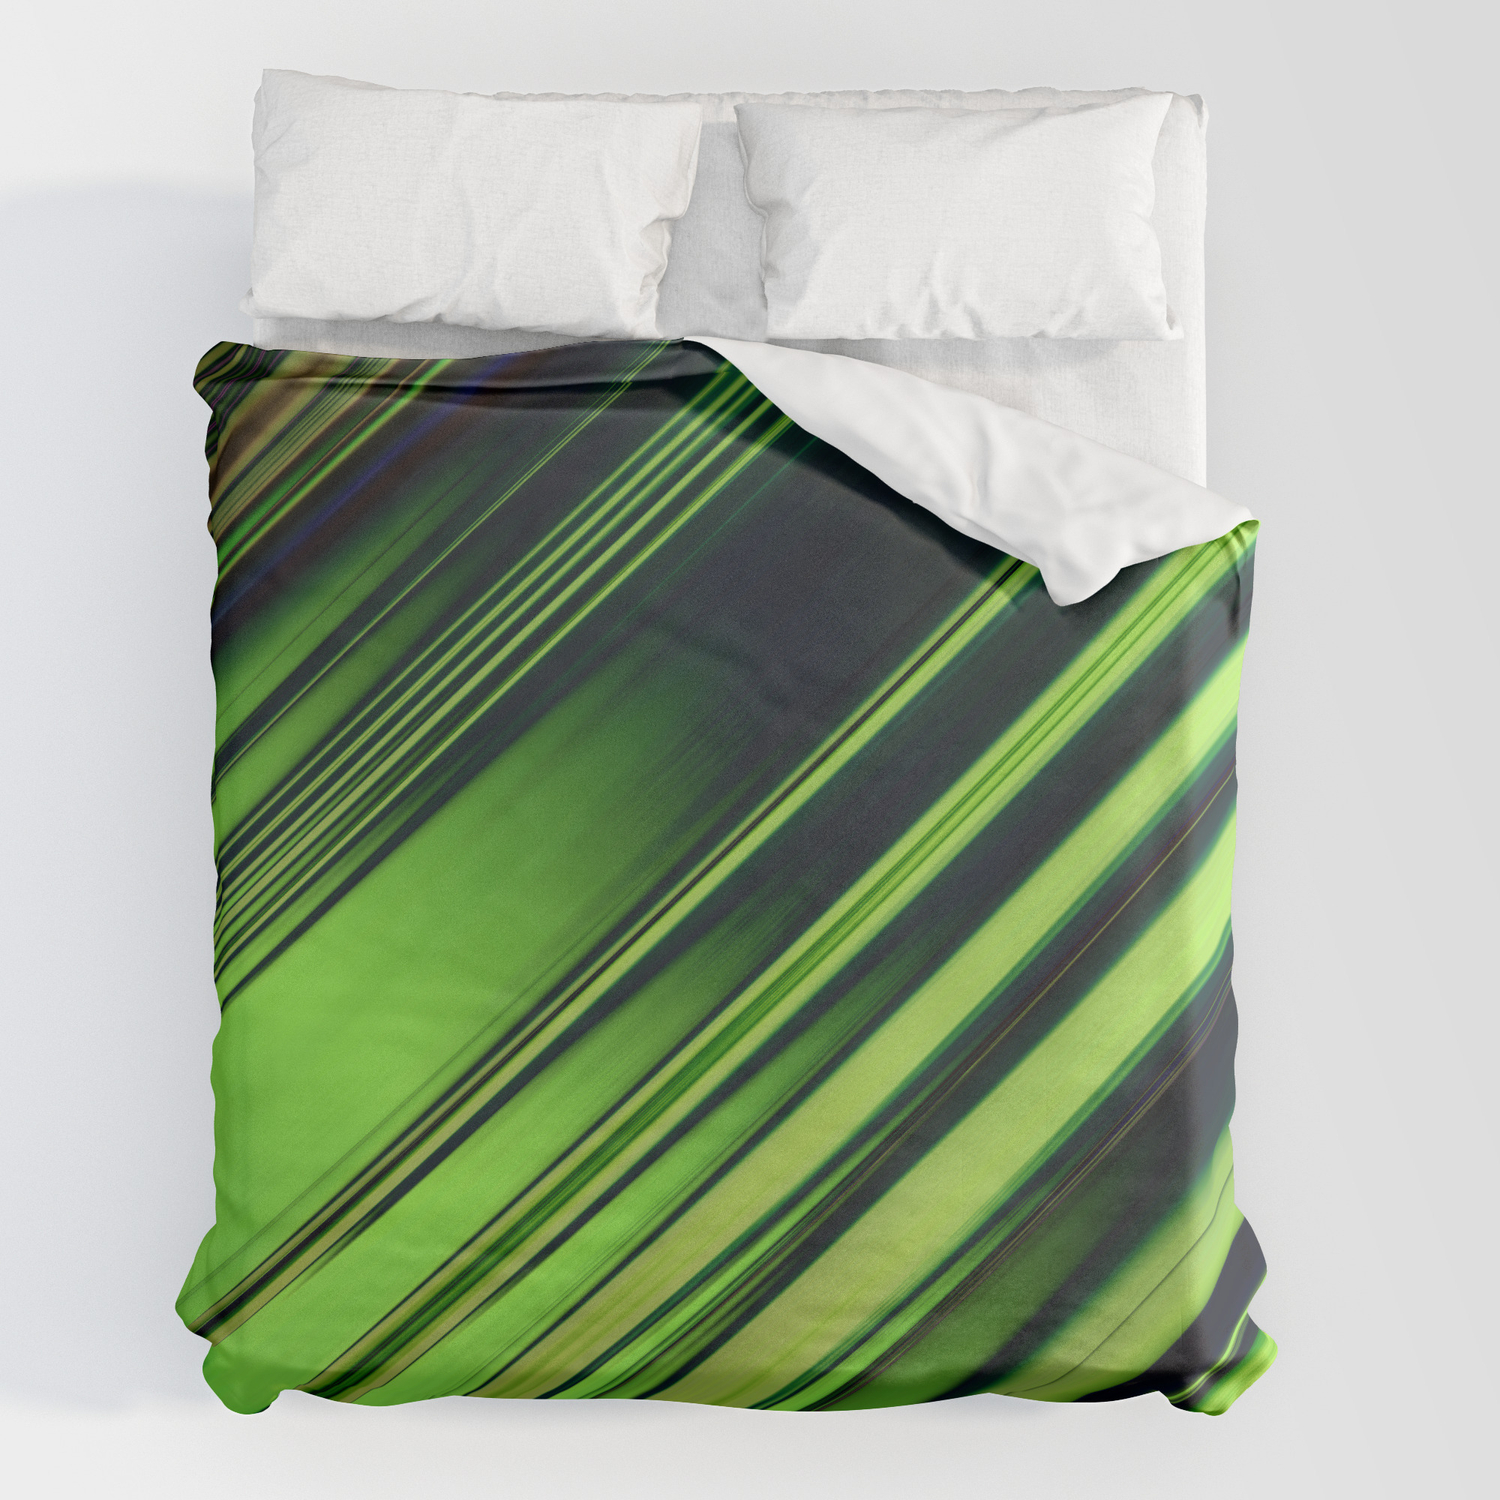 Black Duvet Cover By Lyle Hatch Society6, Green And Black Duvet Cover